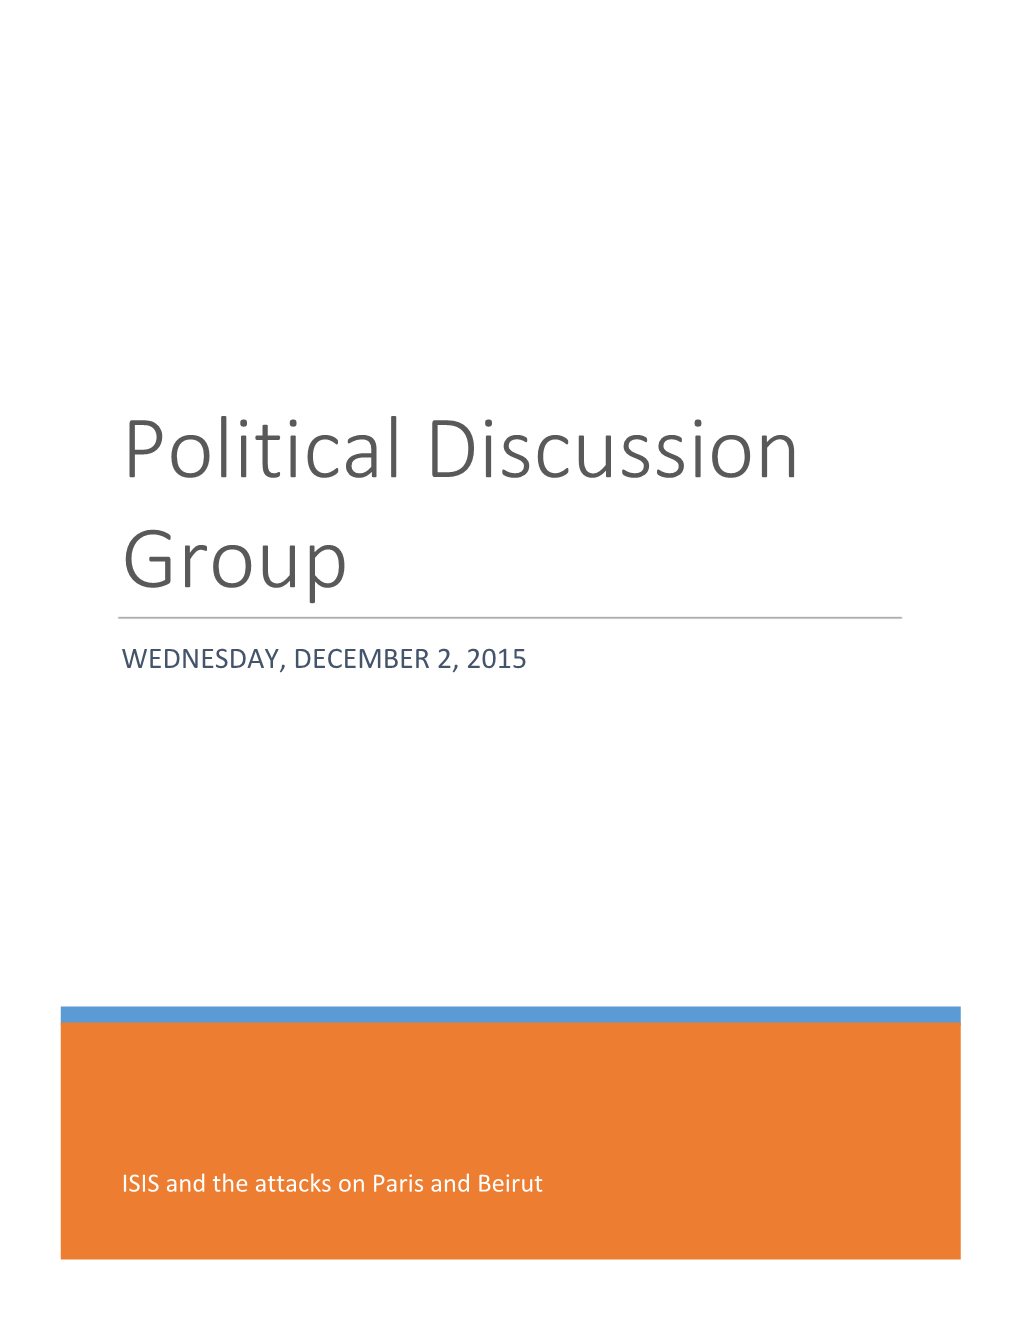 Political Discussion Group